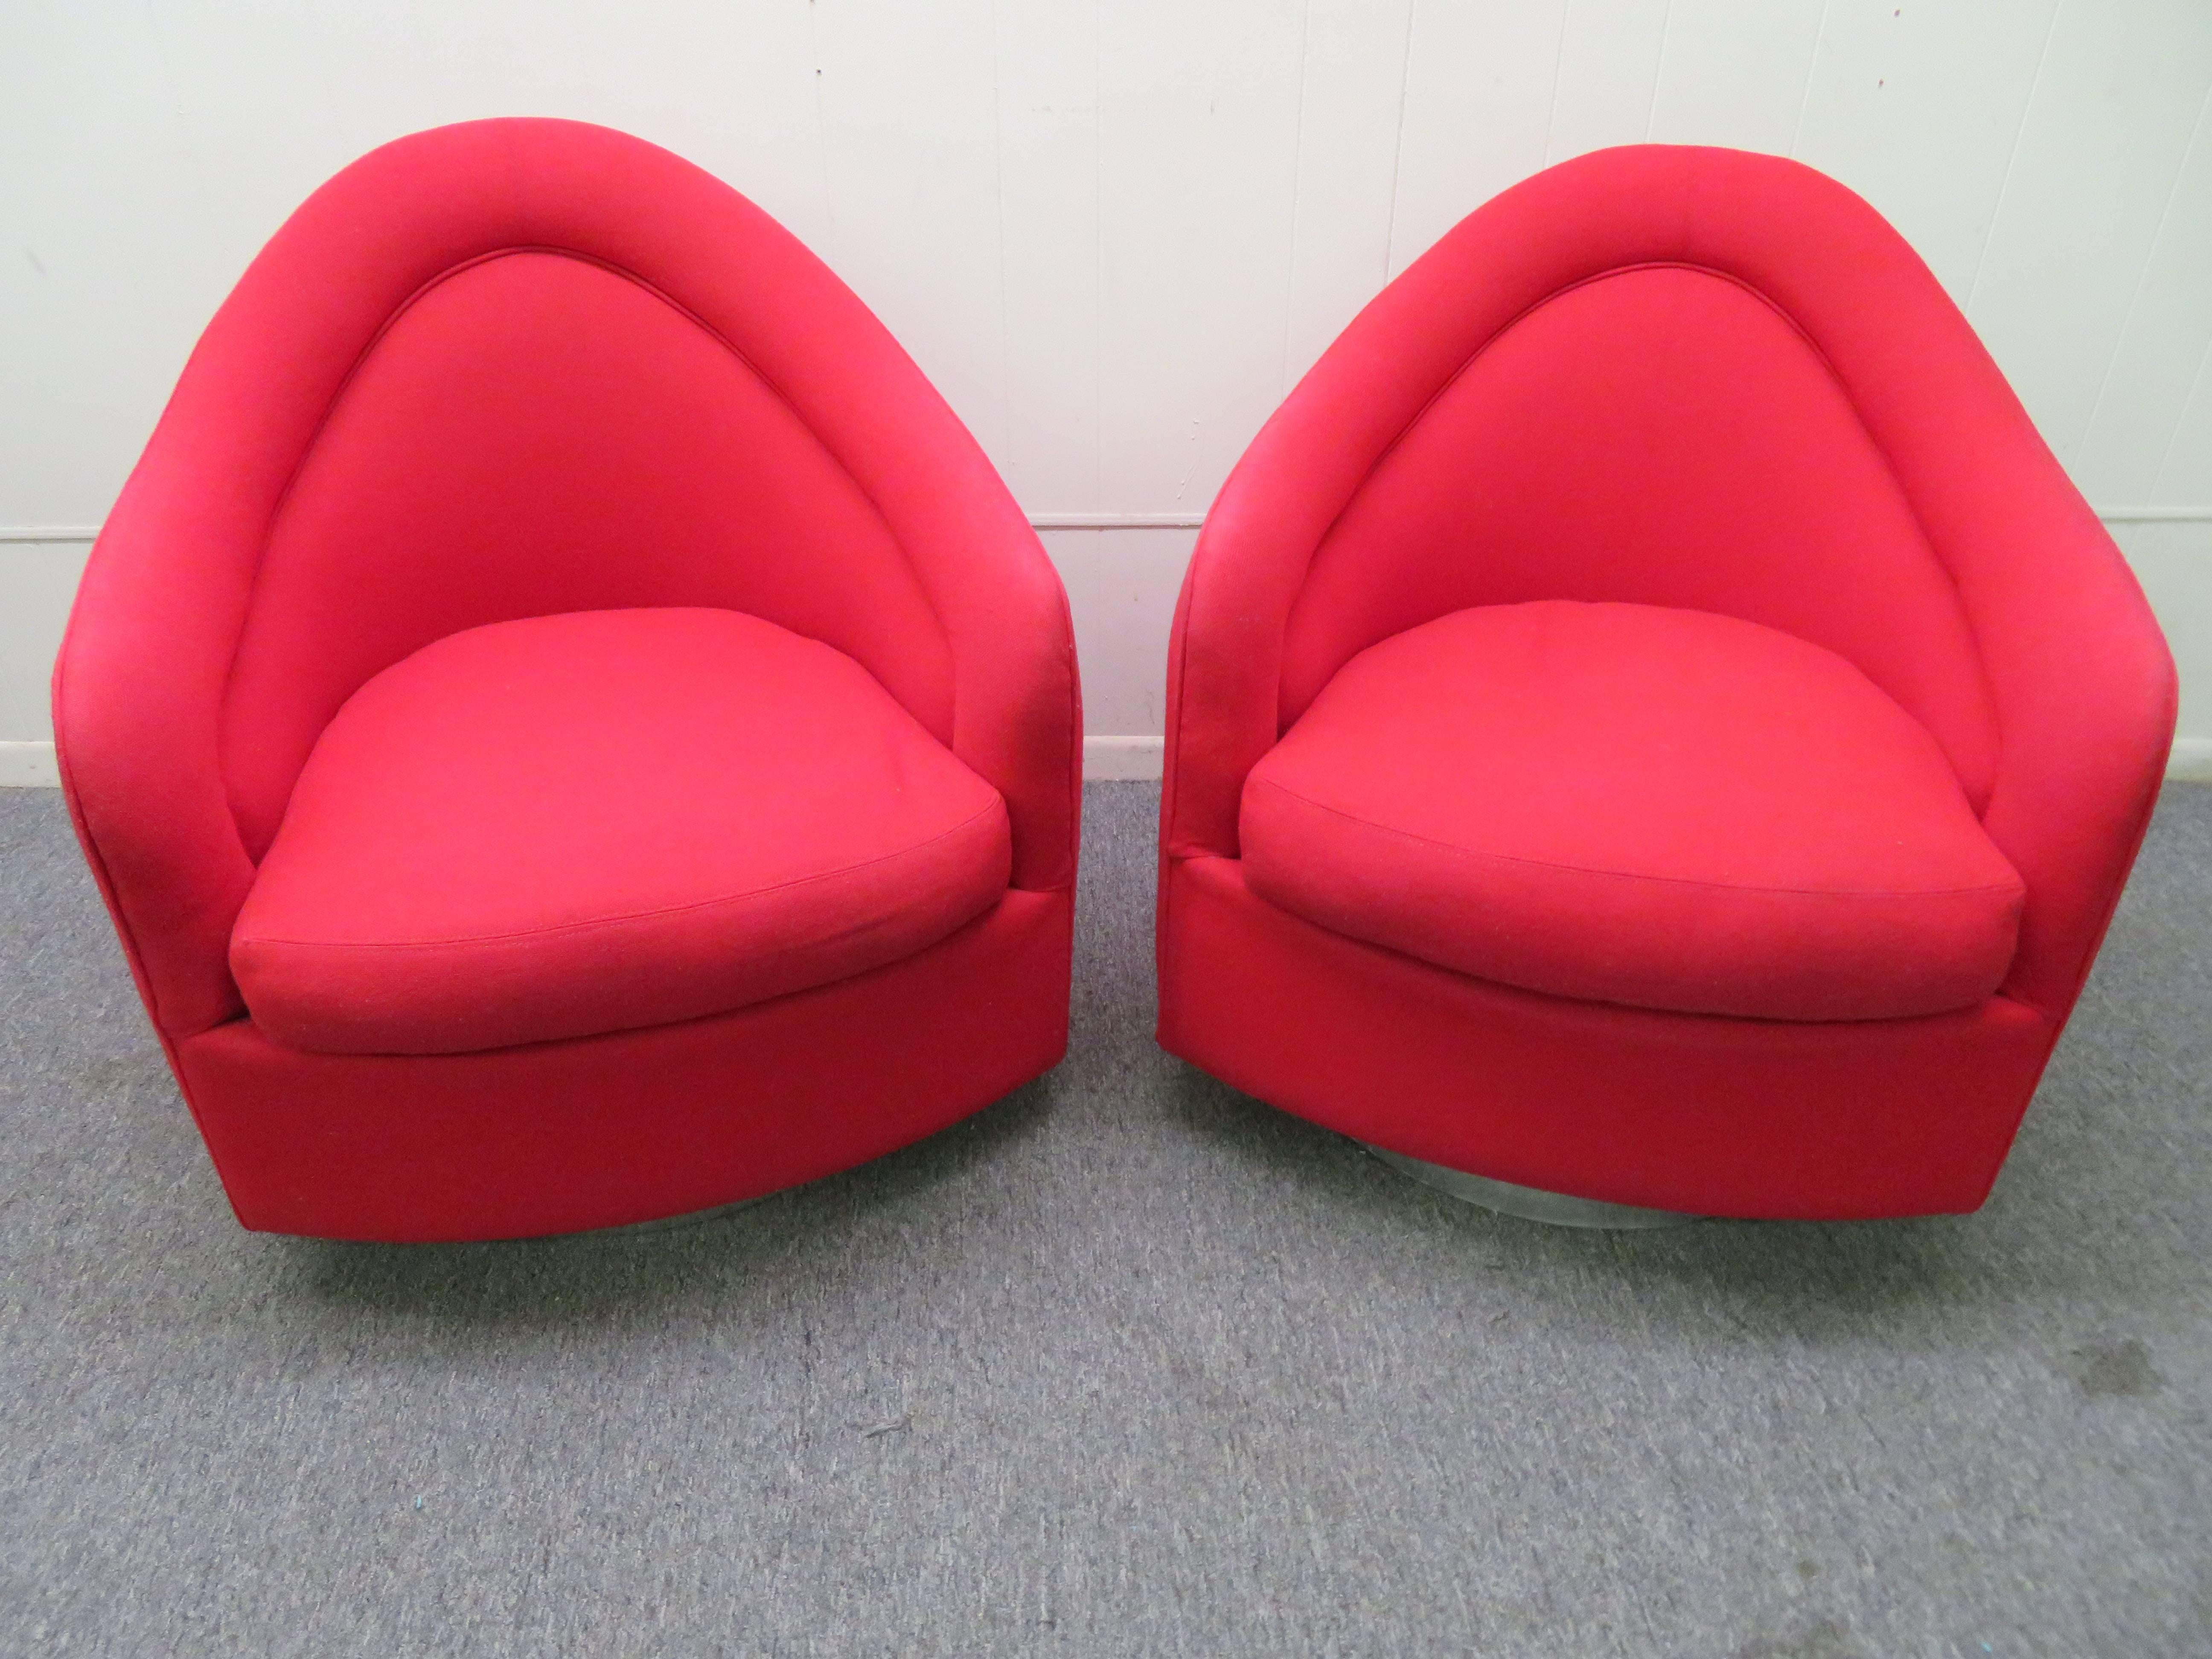 Stunning pair of signed Milo Baughman Thayer Coggin swivel rocker chairs. If you have ever sat in one of these rocking swivel chairs by Milo Baughman you would know what an experience it really is.